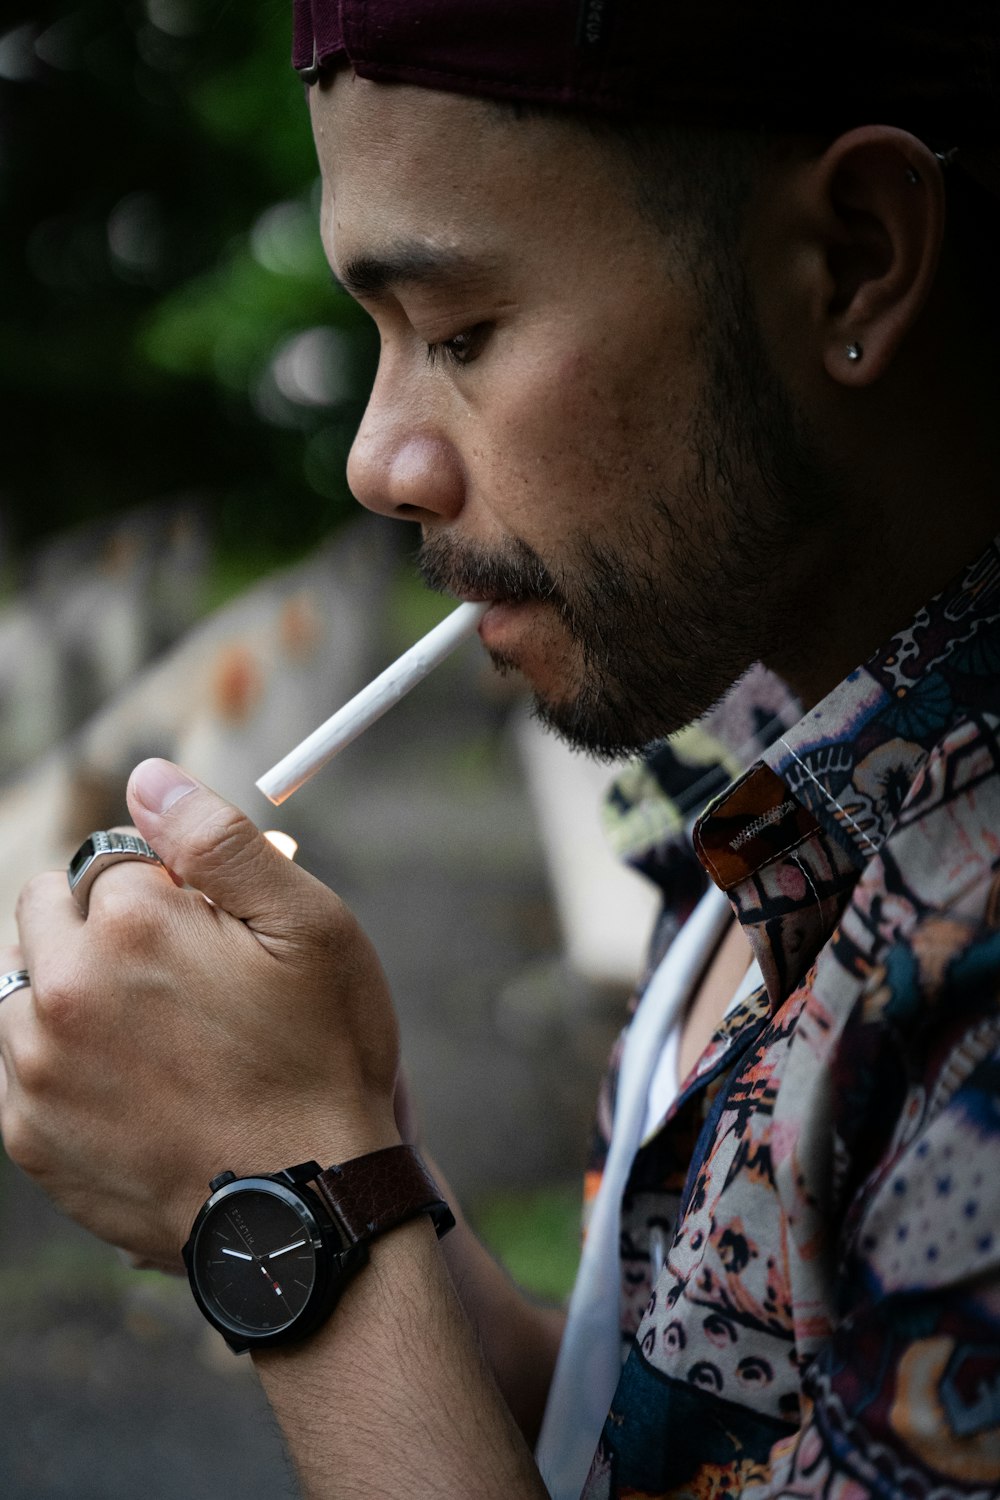 a man with a watch on his wrist smoking a cigarette